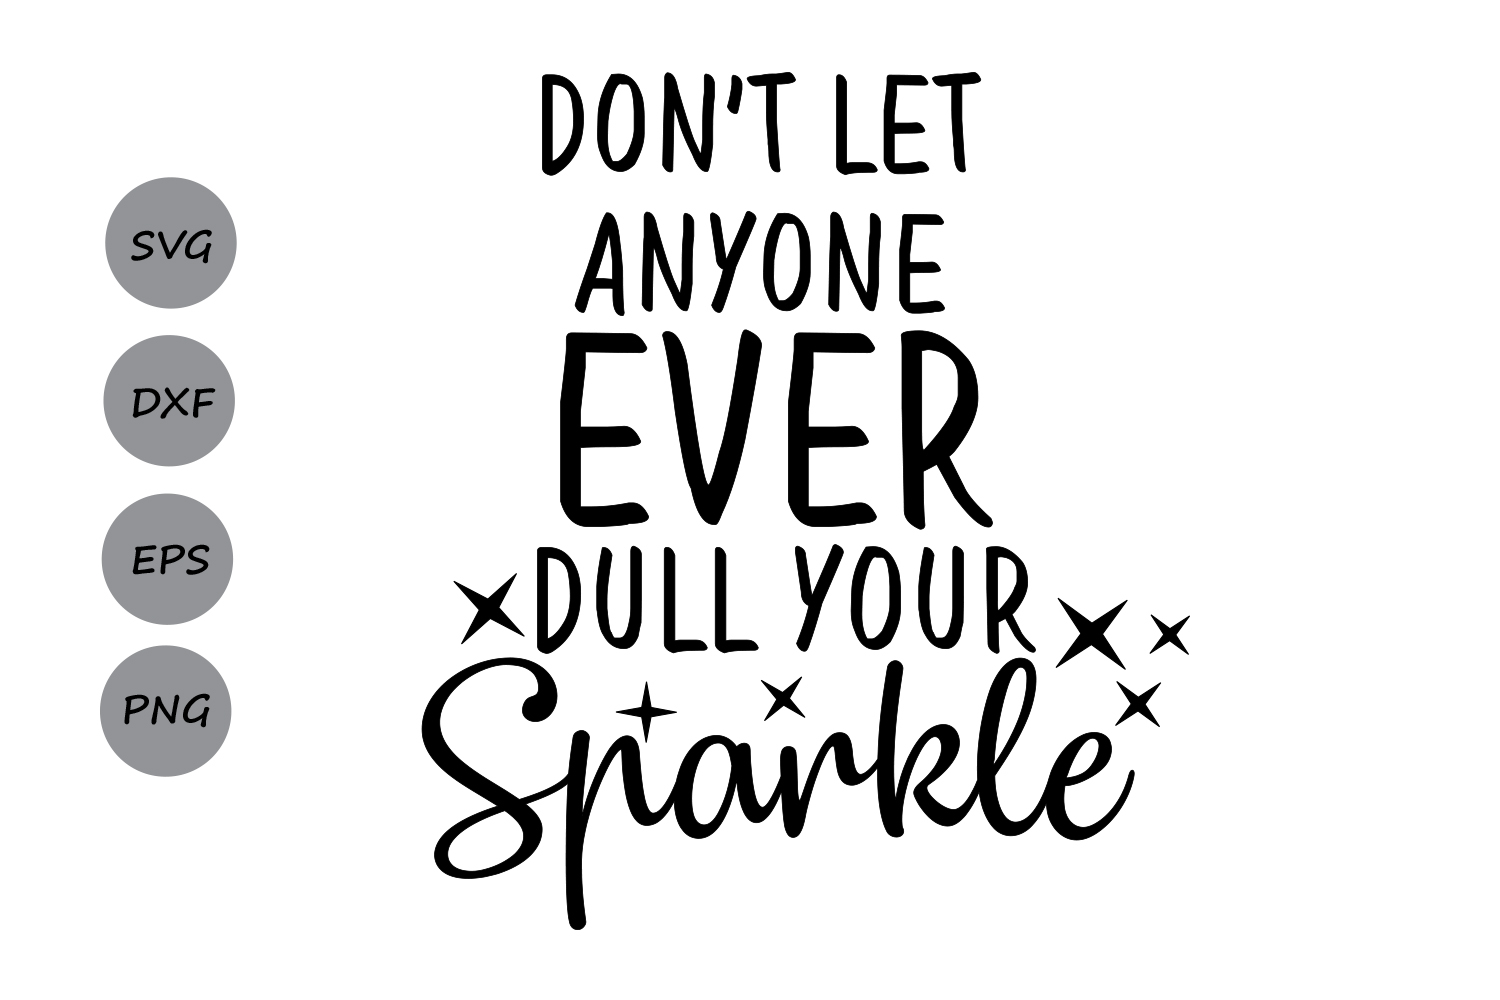 don t ever dull your sparkle